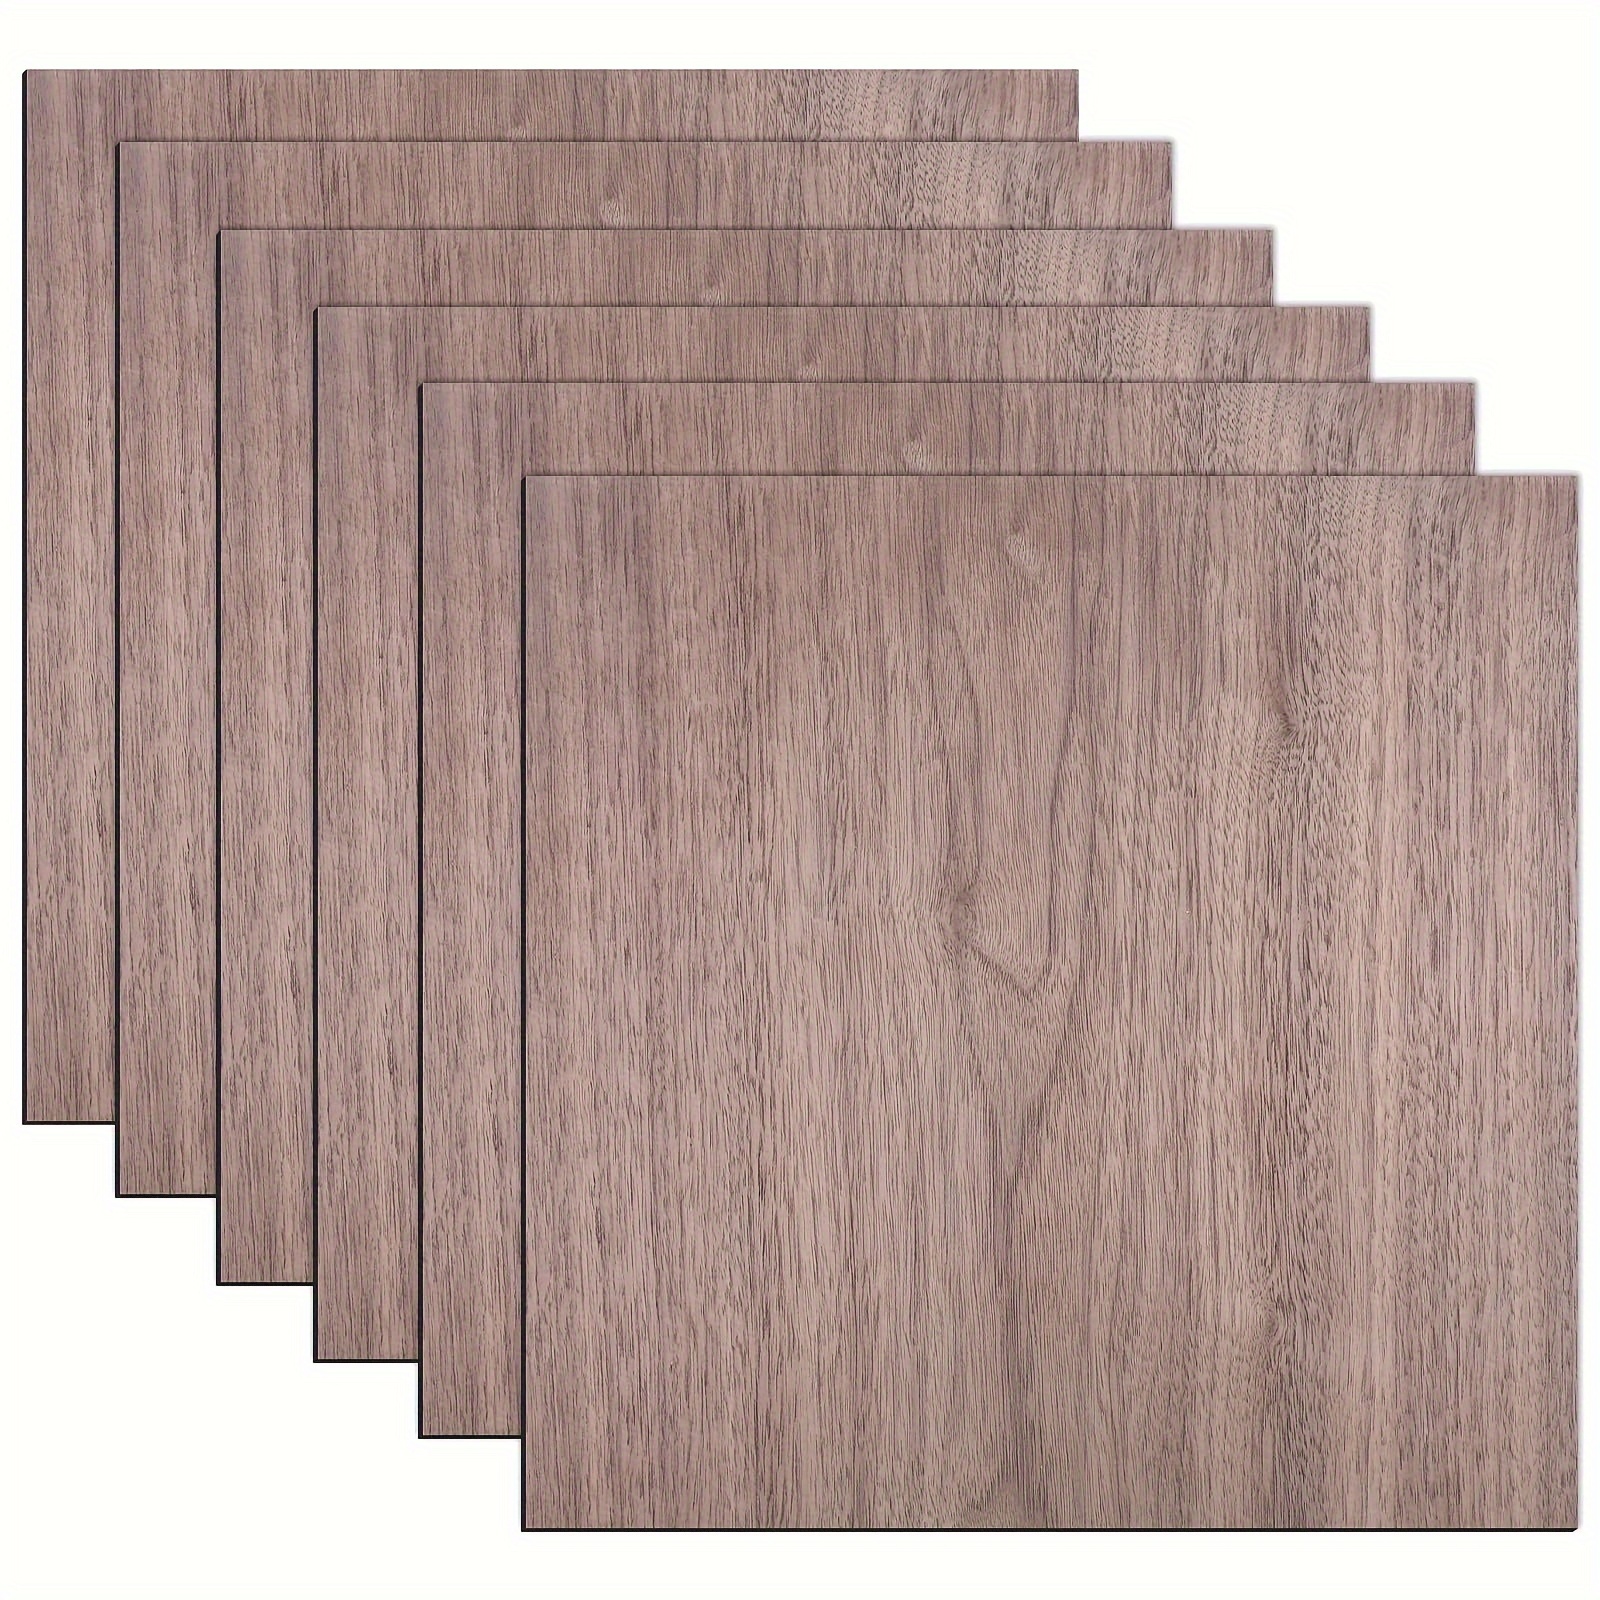 

Walnut Plywood 6pcs, 0.15''x 11.8'' X 11.8'' Real Wood Plywood Sheets Premium For Laser Cutting, Engraving, Cnc Cutting, Painting, Fretwork And Wood Burning